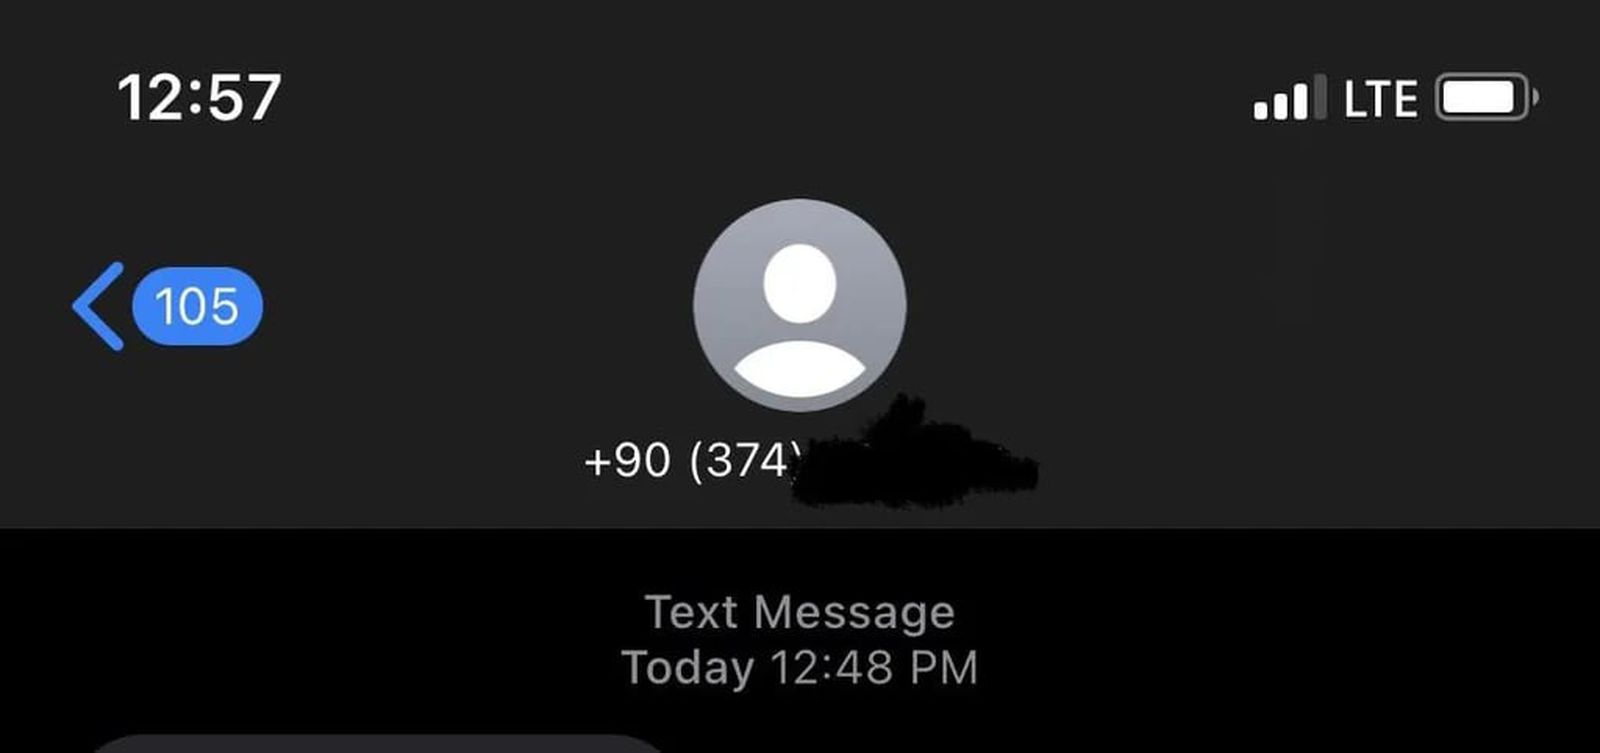 Curious iPhone Bug Causing Non-iMessage Texts to Display Extra + Character, Breaking Conversations - macrumors.com